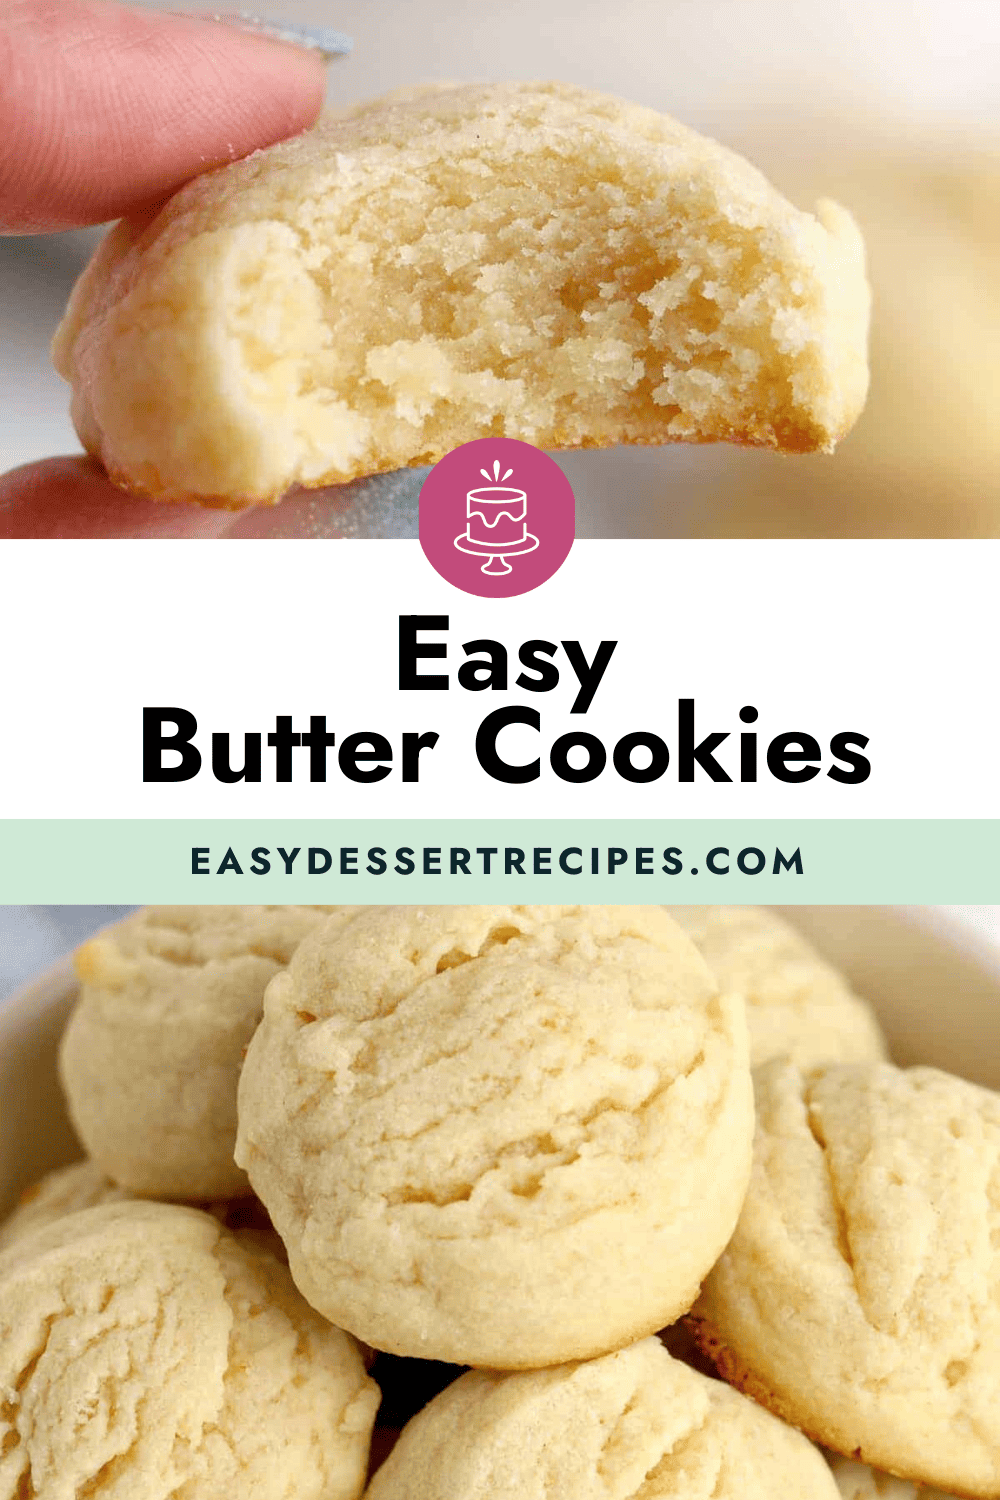 easy butter cookies with the text easy butter cookies.